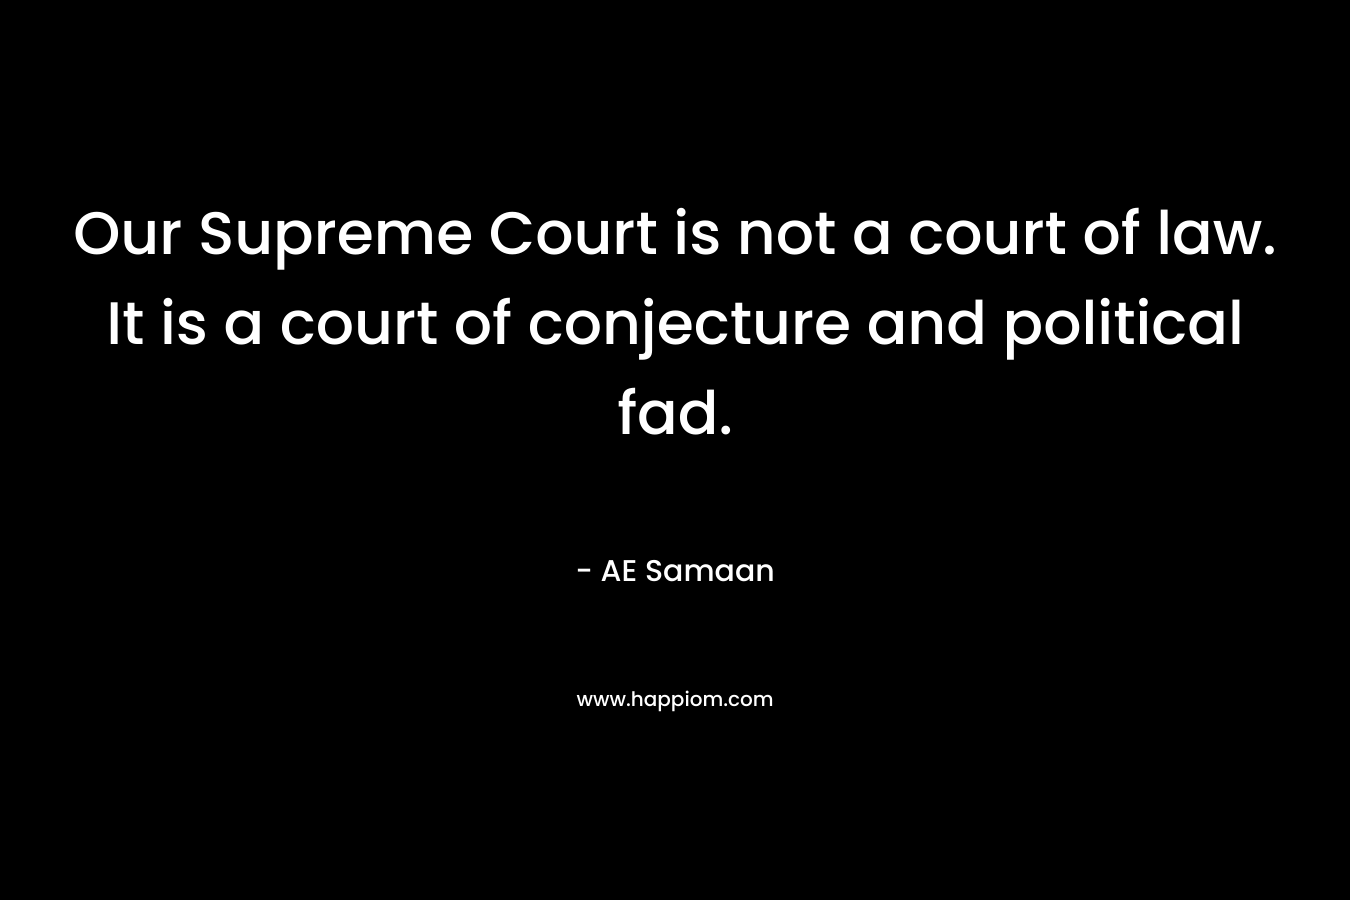 Our Supreme Court is not a court of law. It is a court of conjecture and political fad. – AE Samaan